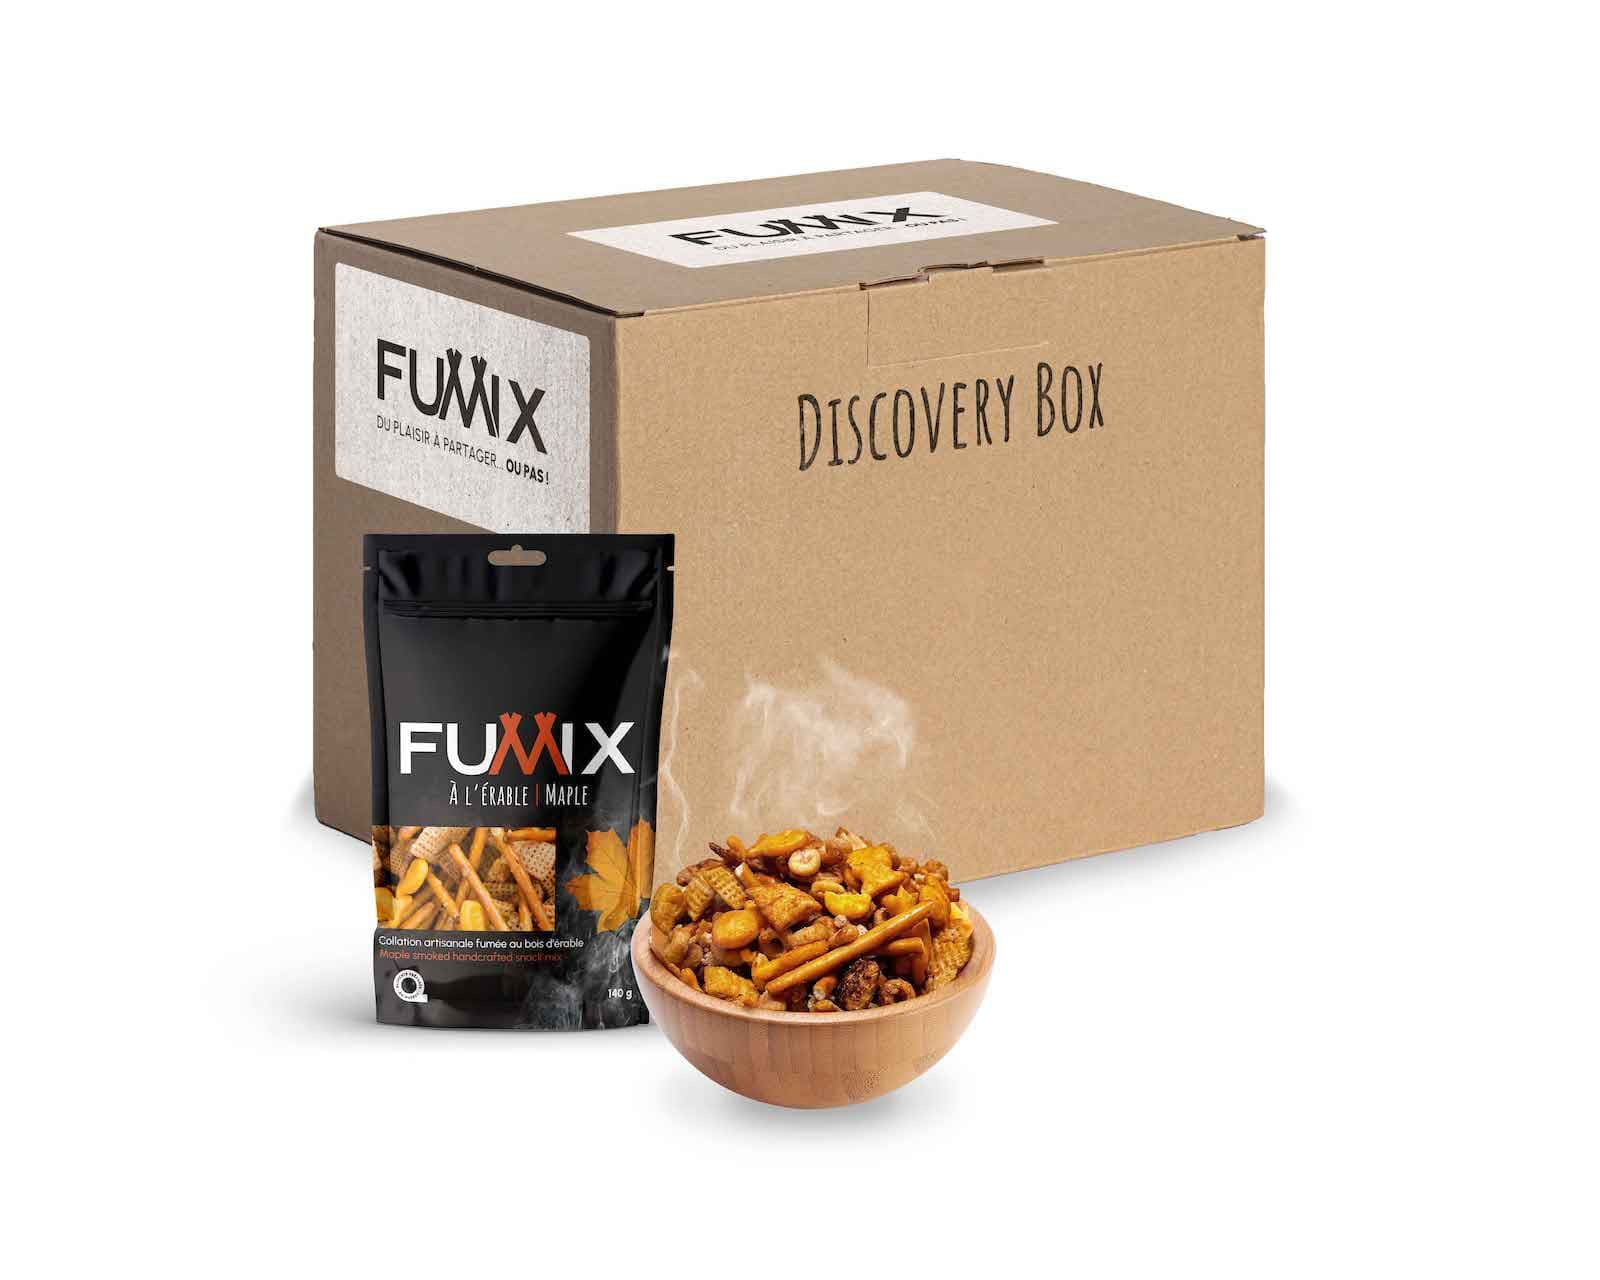 Discovery Box: Discover our smoked delights - Fumix